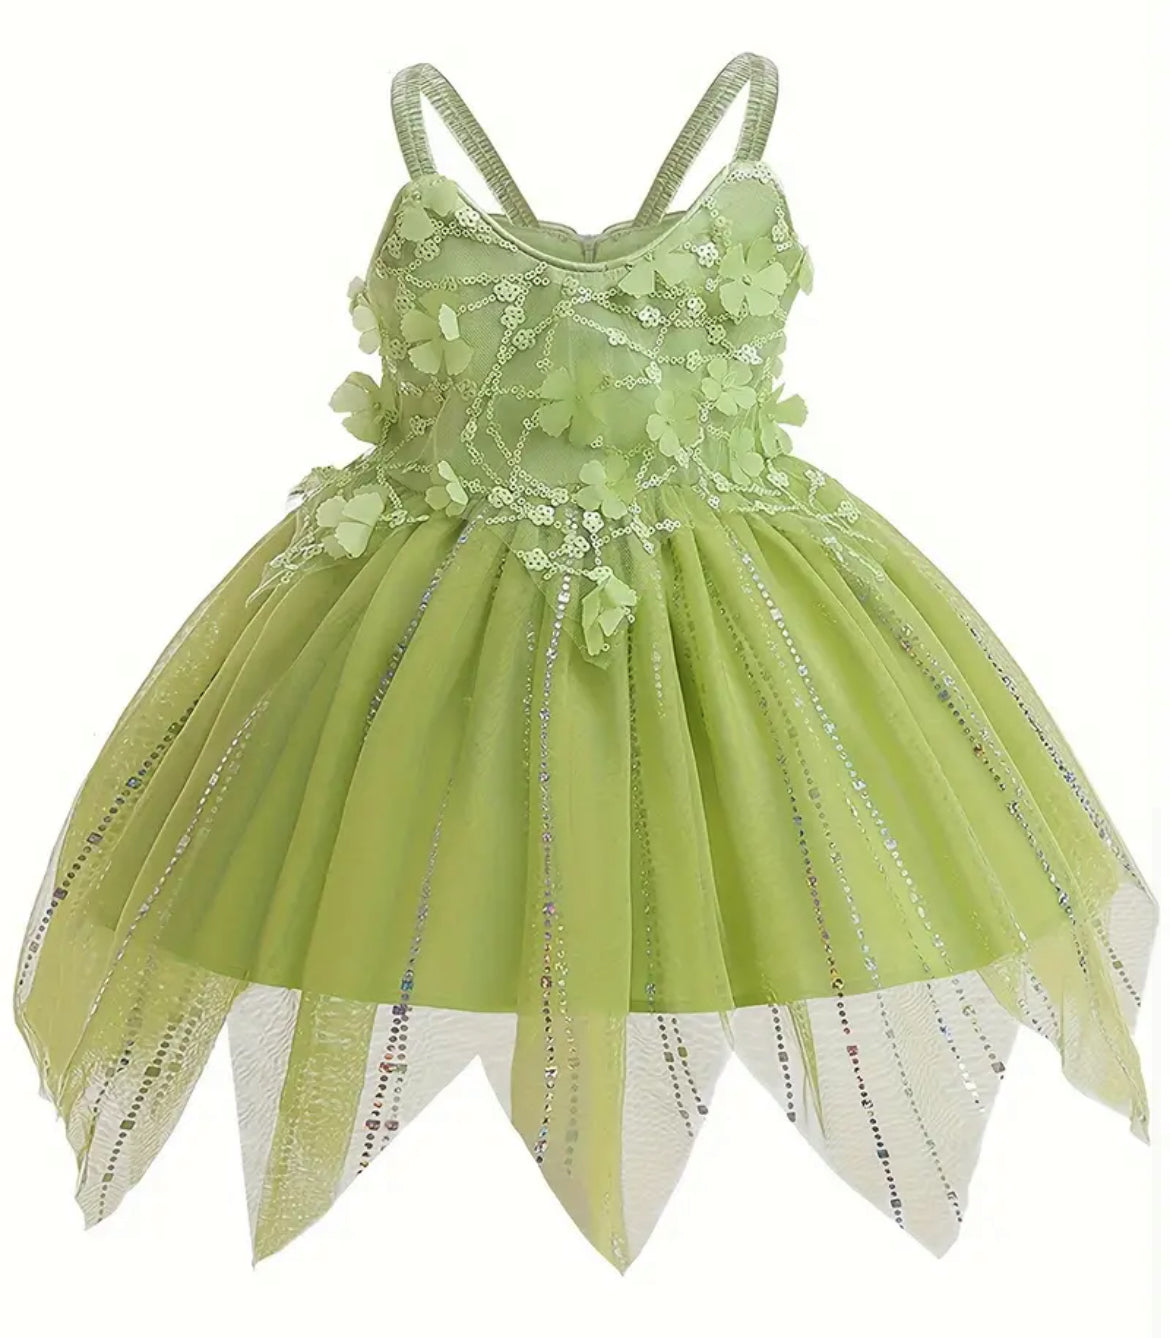 Dreamy Girls Fancy Princess Fairy Tutu Dress, Tinker Bell, Glam ✨ Baby and Disney ♥️🖤Collection